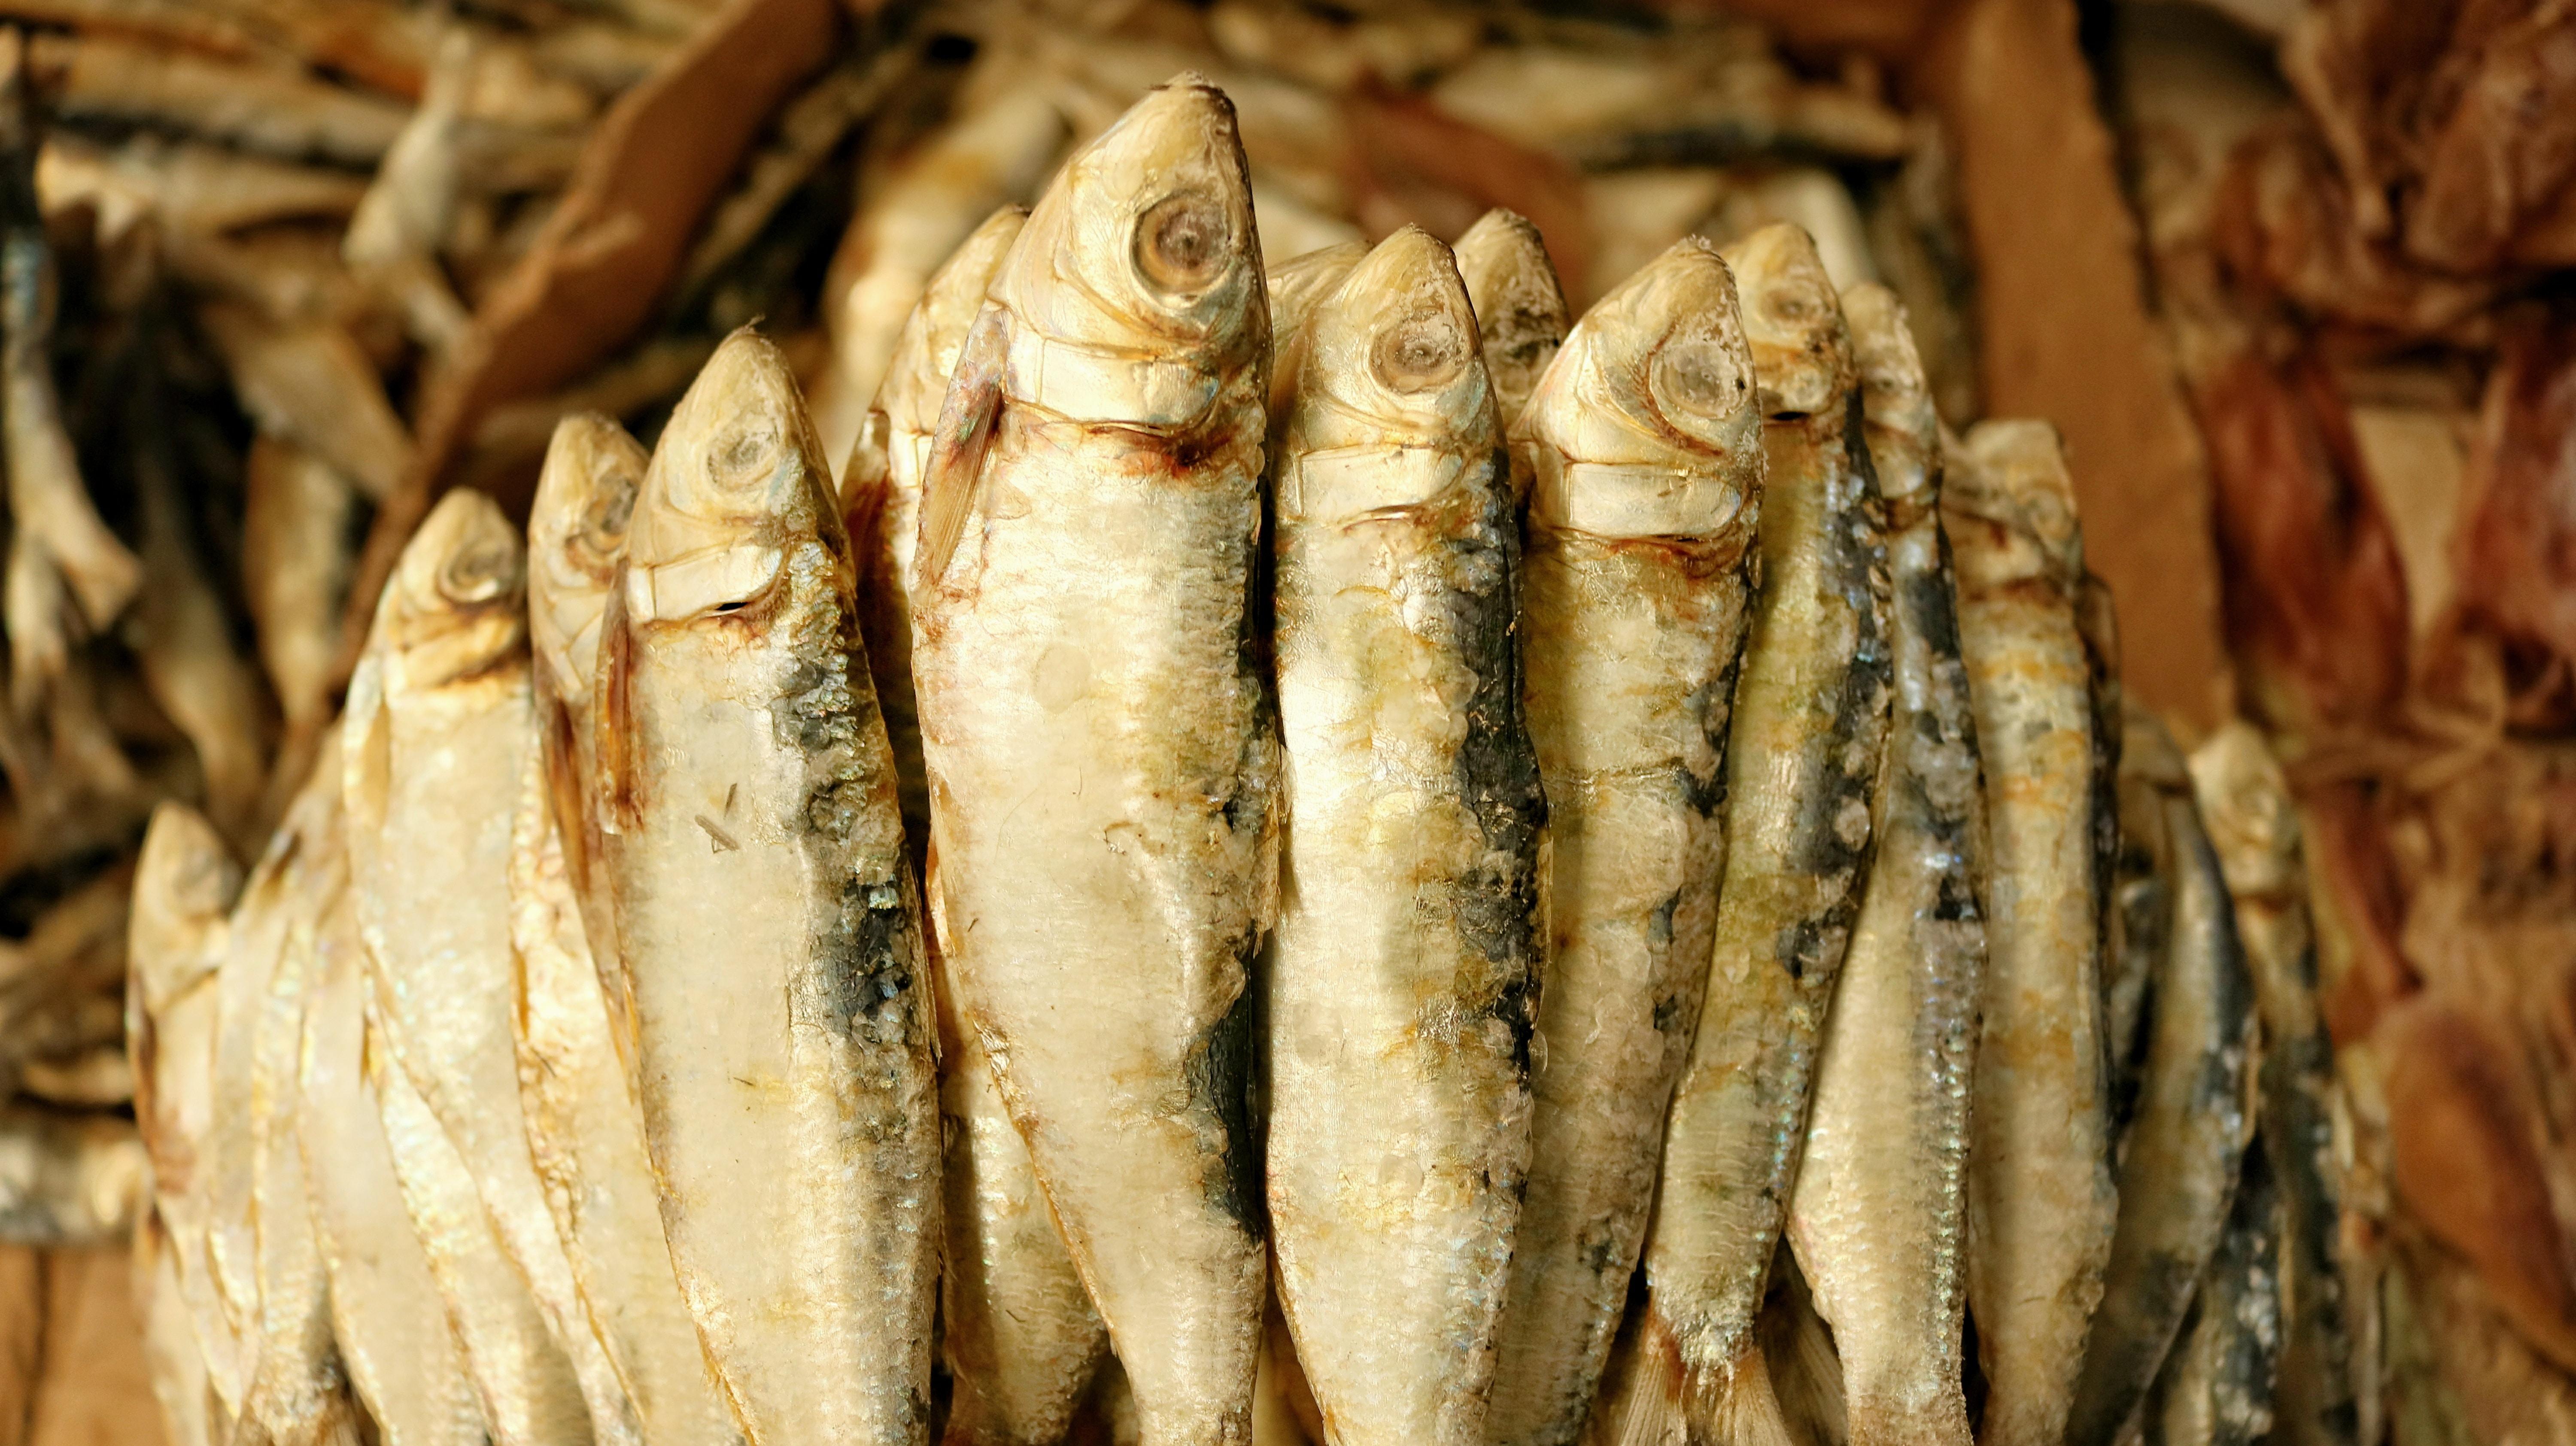 Sardines Picture. Download Free Image